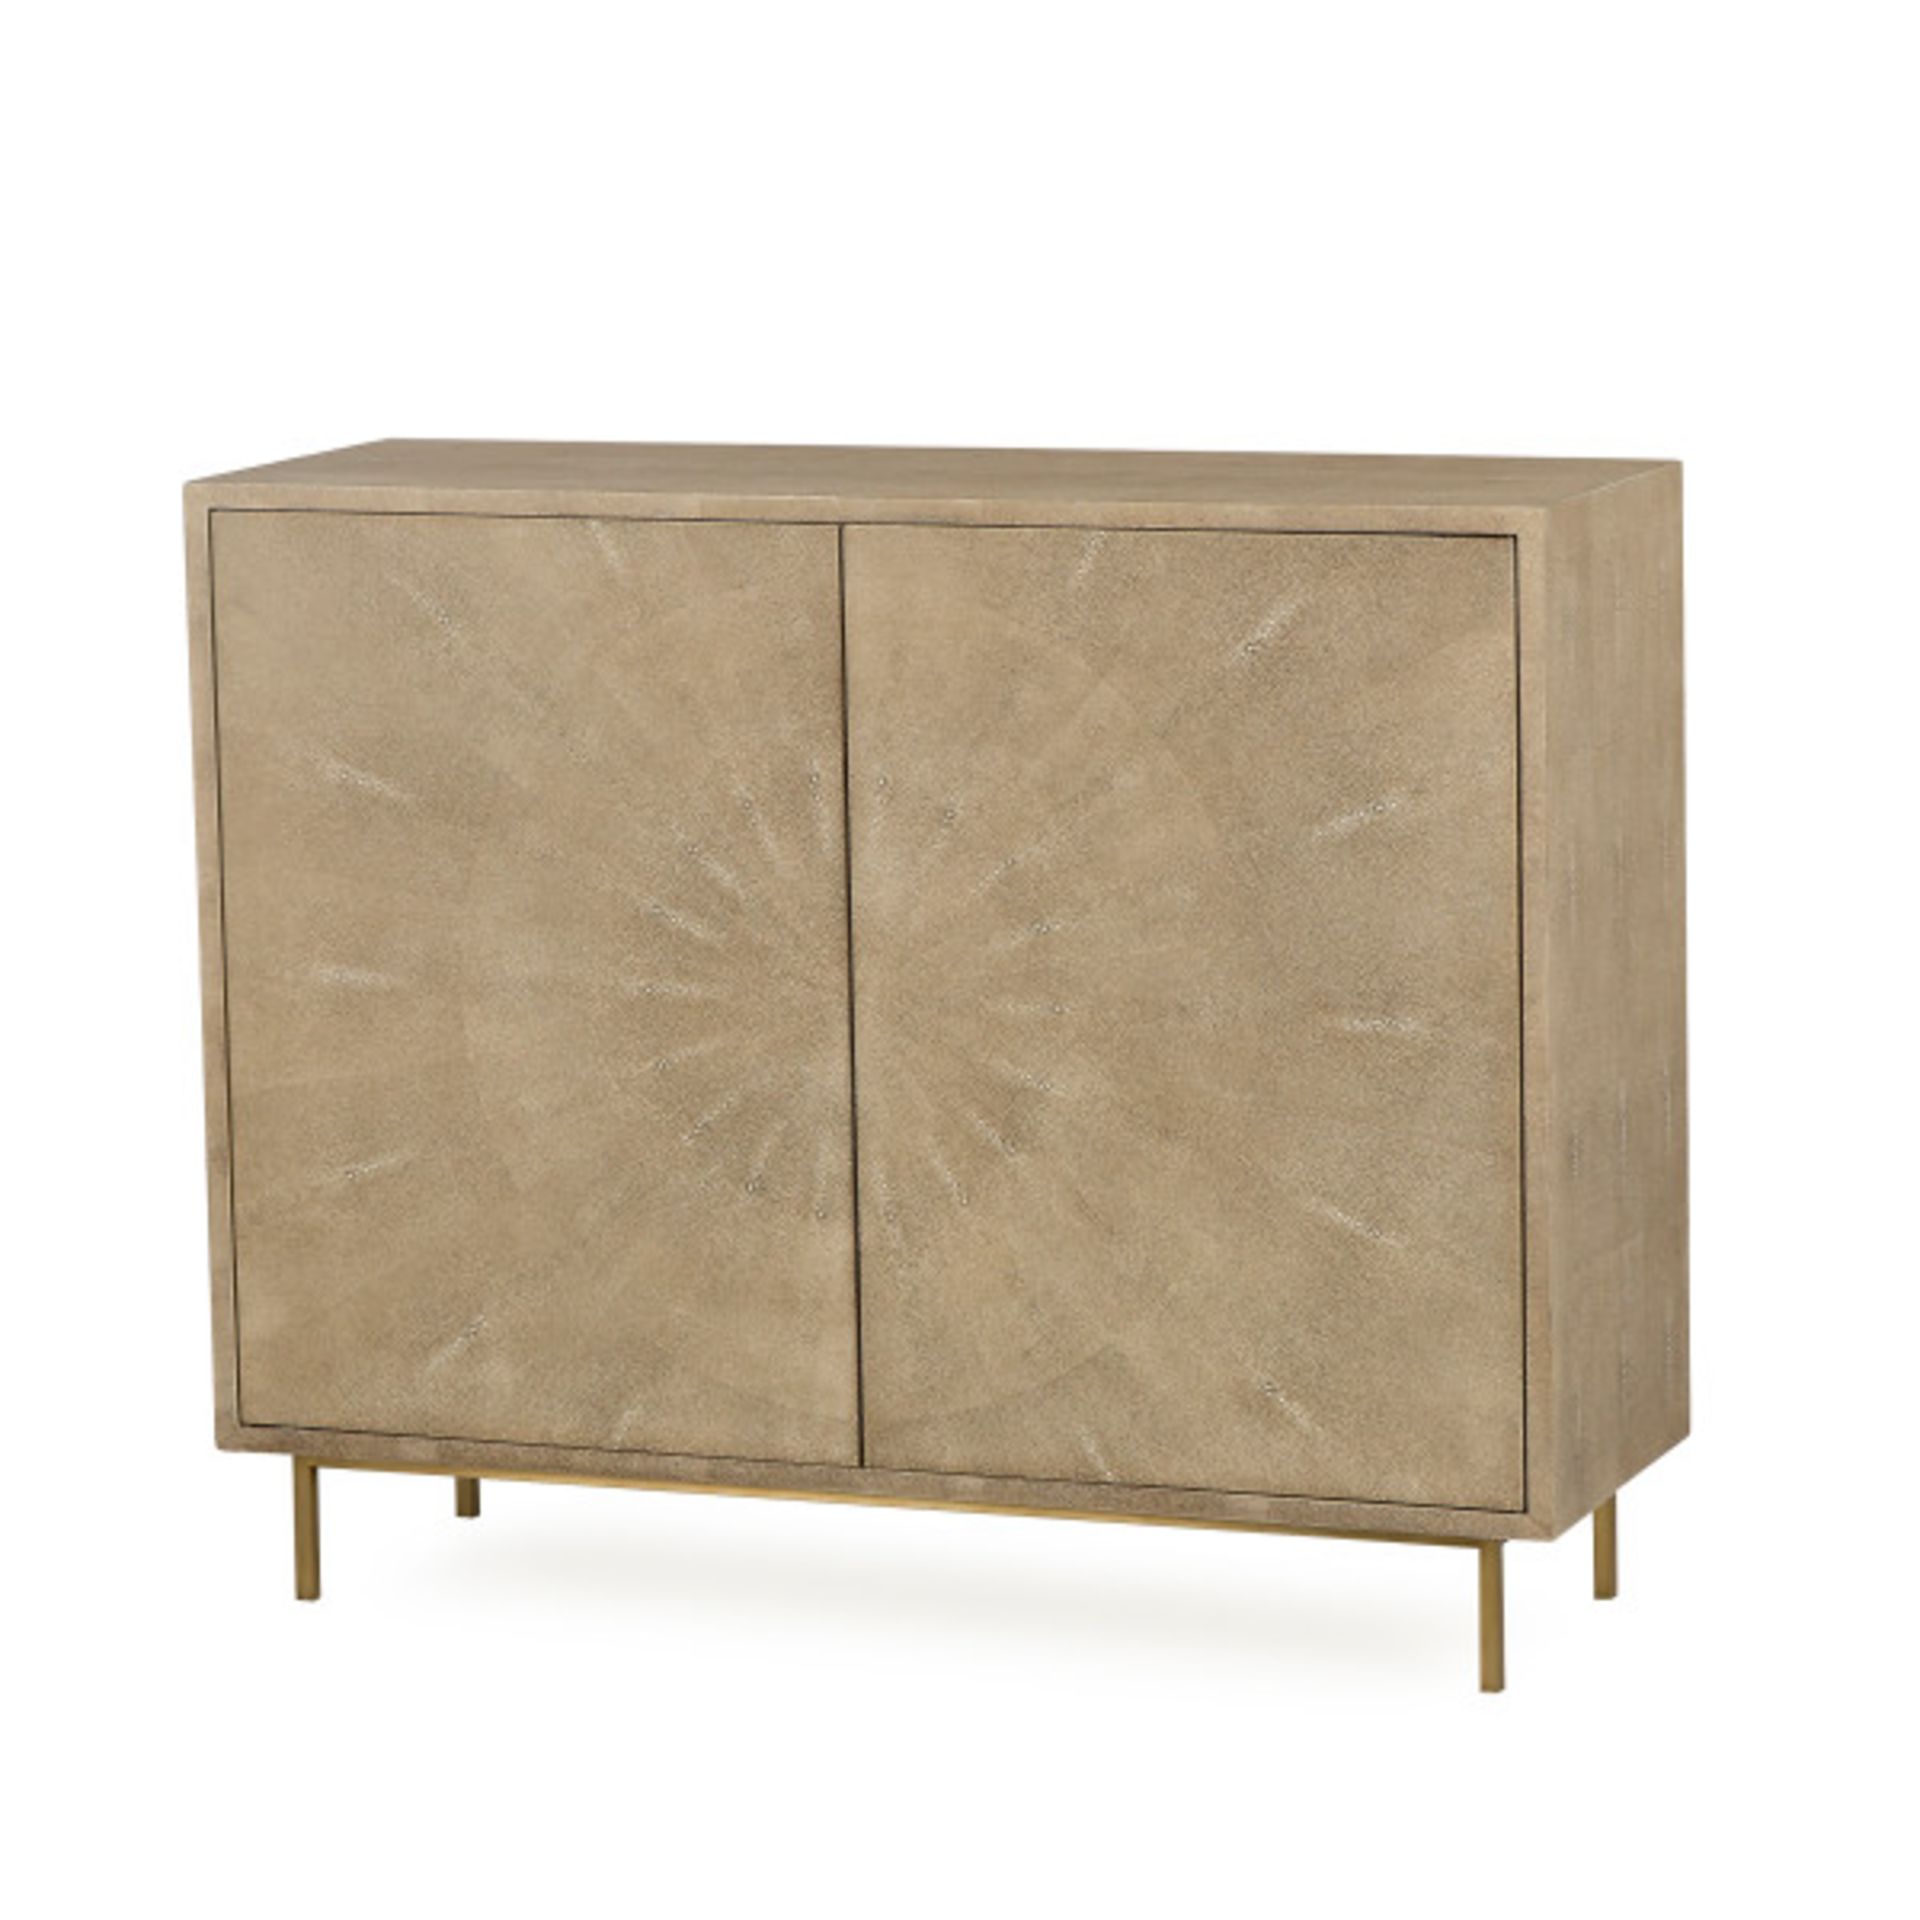 Crawford 2 Door Sideboard Console Narrow 2 Door Storage Console Wrapped In Cream Coloured Faux